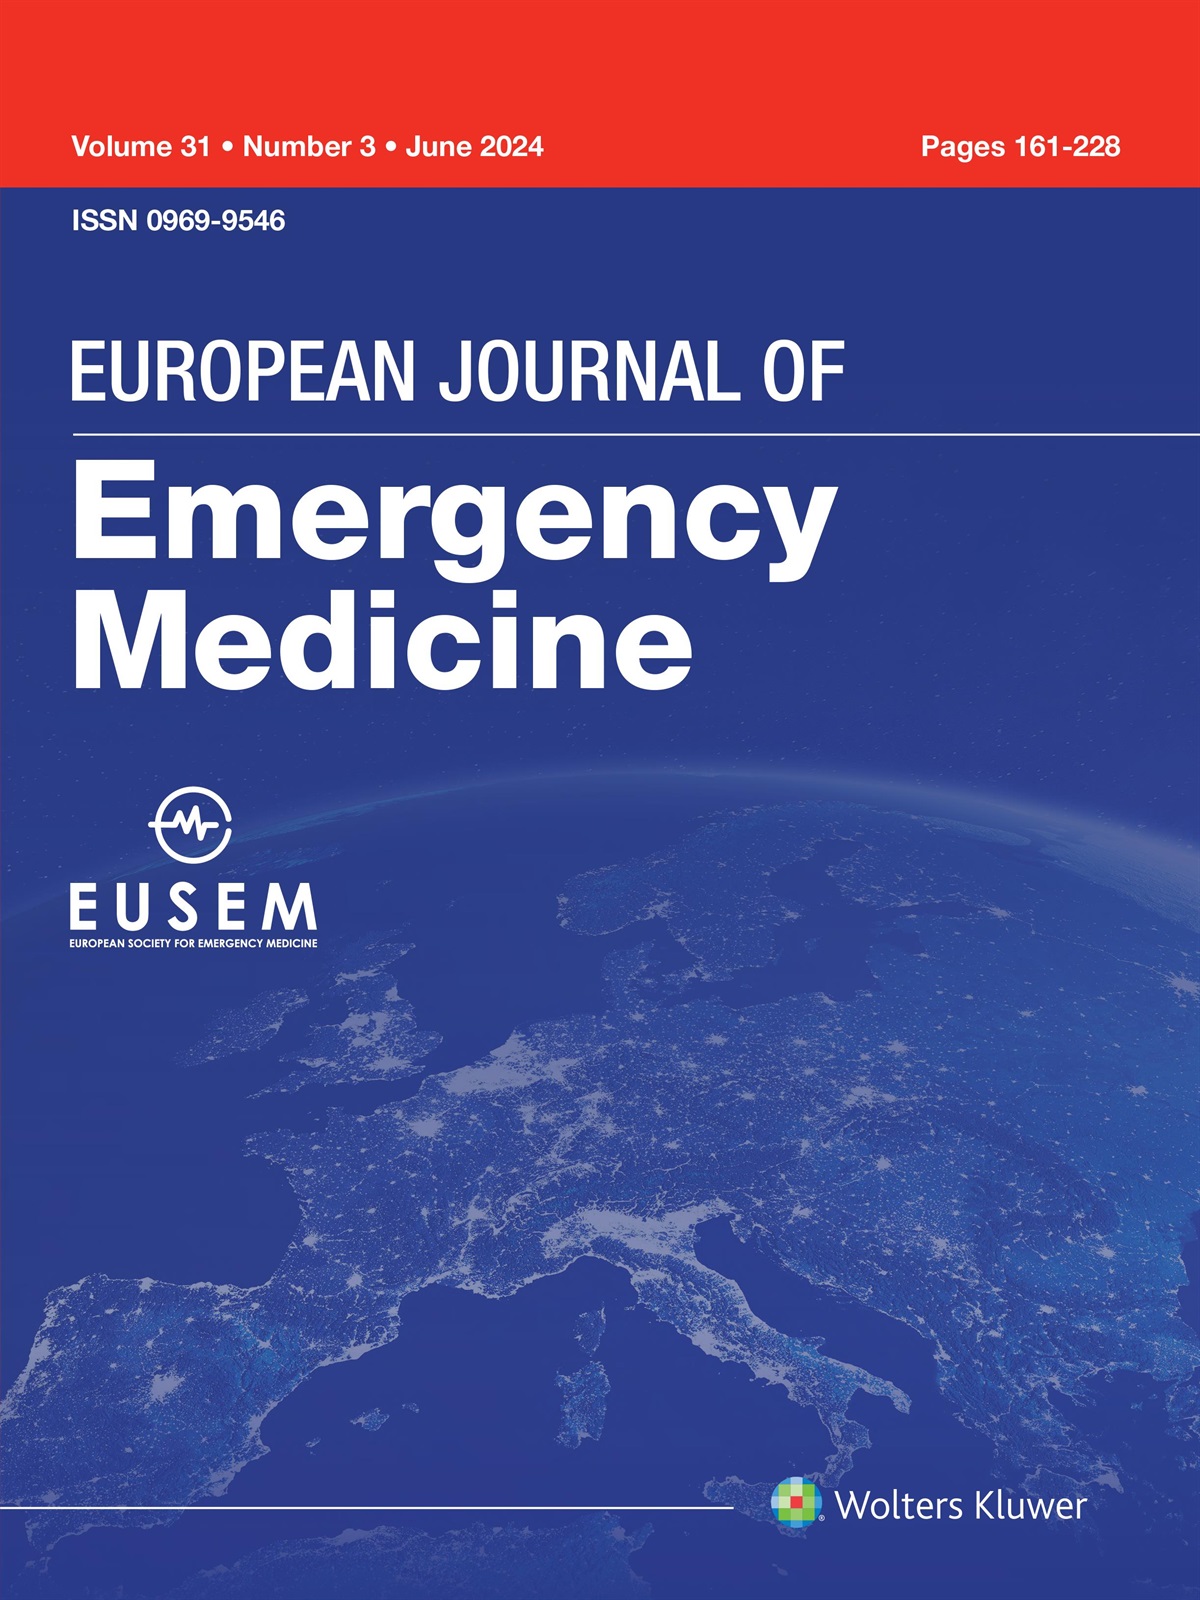 30 years of the European Society of Emergency Medicine – European Emergency Medicine’s coming of age!